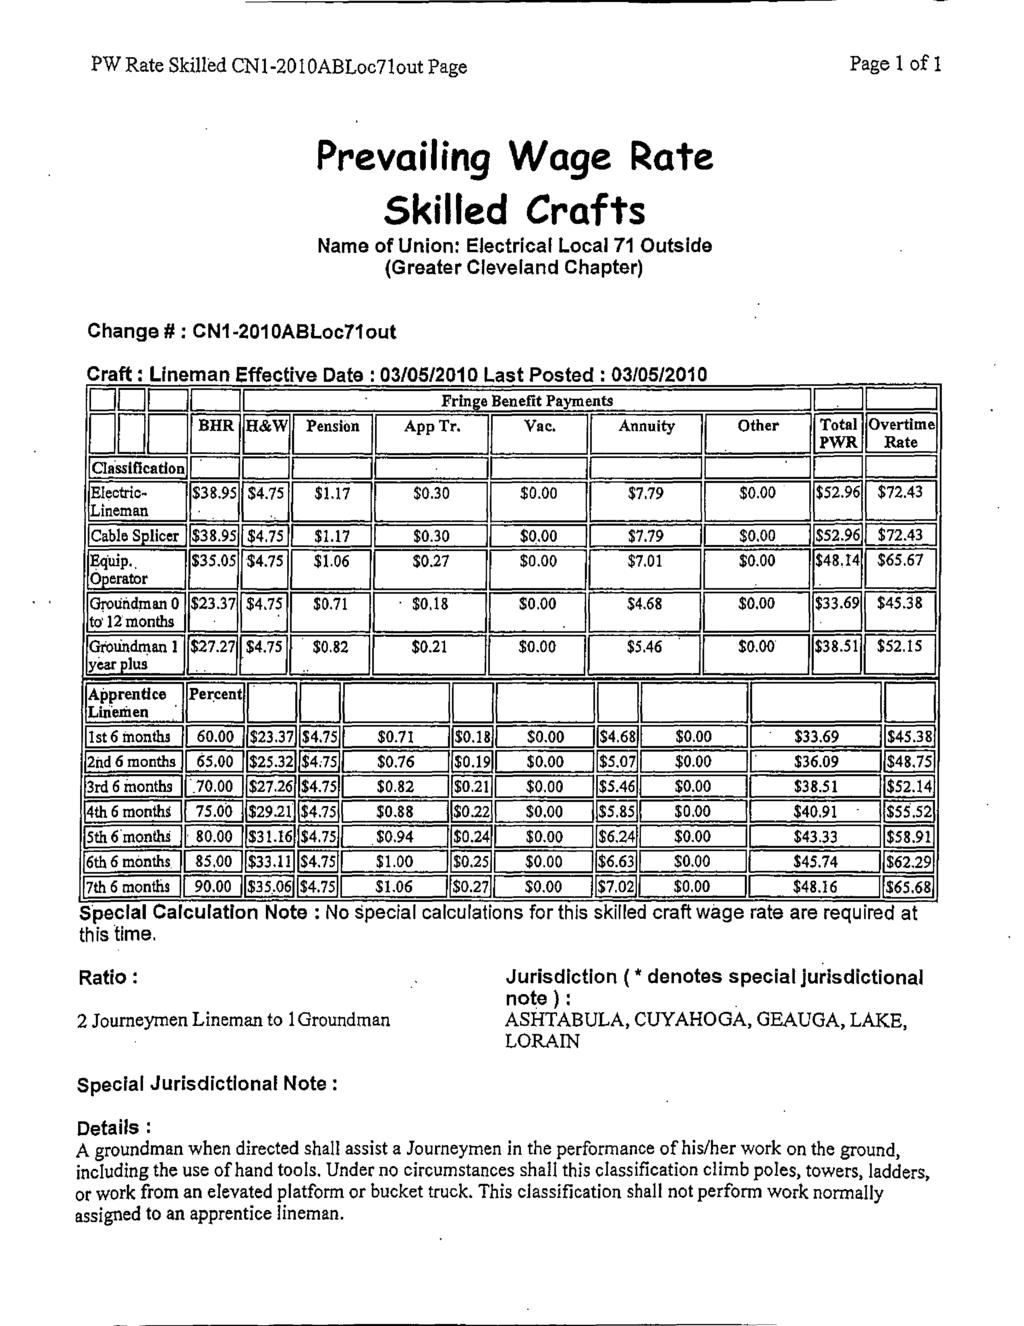 PW Rate Skilled CN1-2010ABLoc7lout Page Page 1 of I Prevailing Wage Rate Skilled Crafts Name of Union: Electrical Local 71 Outside (Greater Cleveland Chapter) Change # : CN1-2010ABLoc7lout Craft :